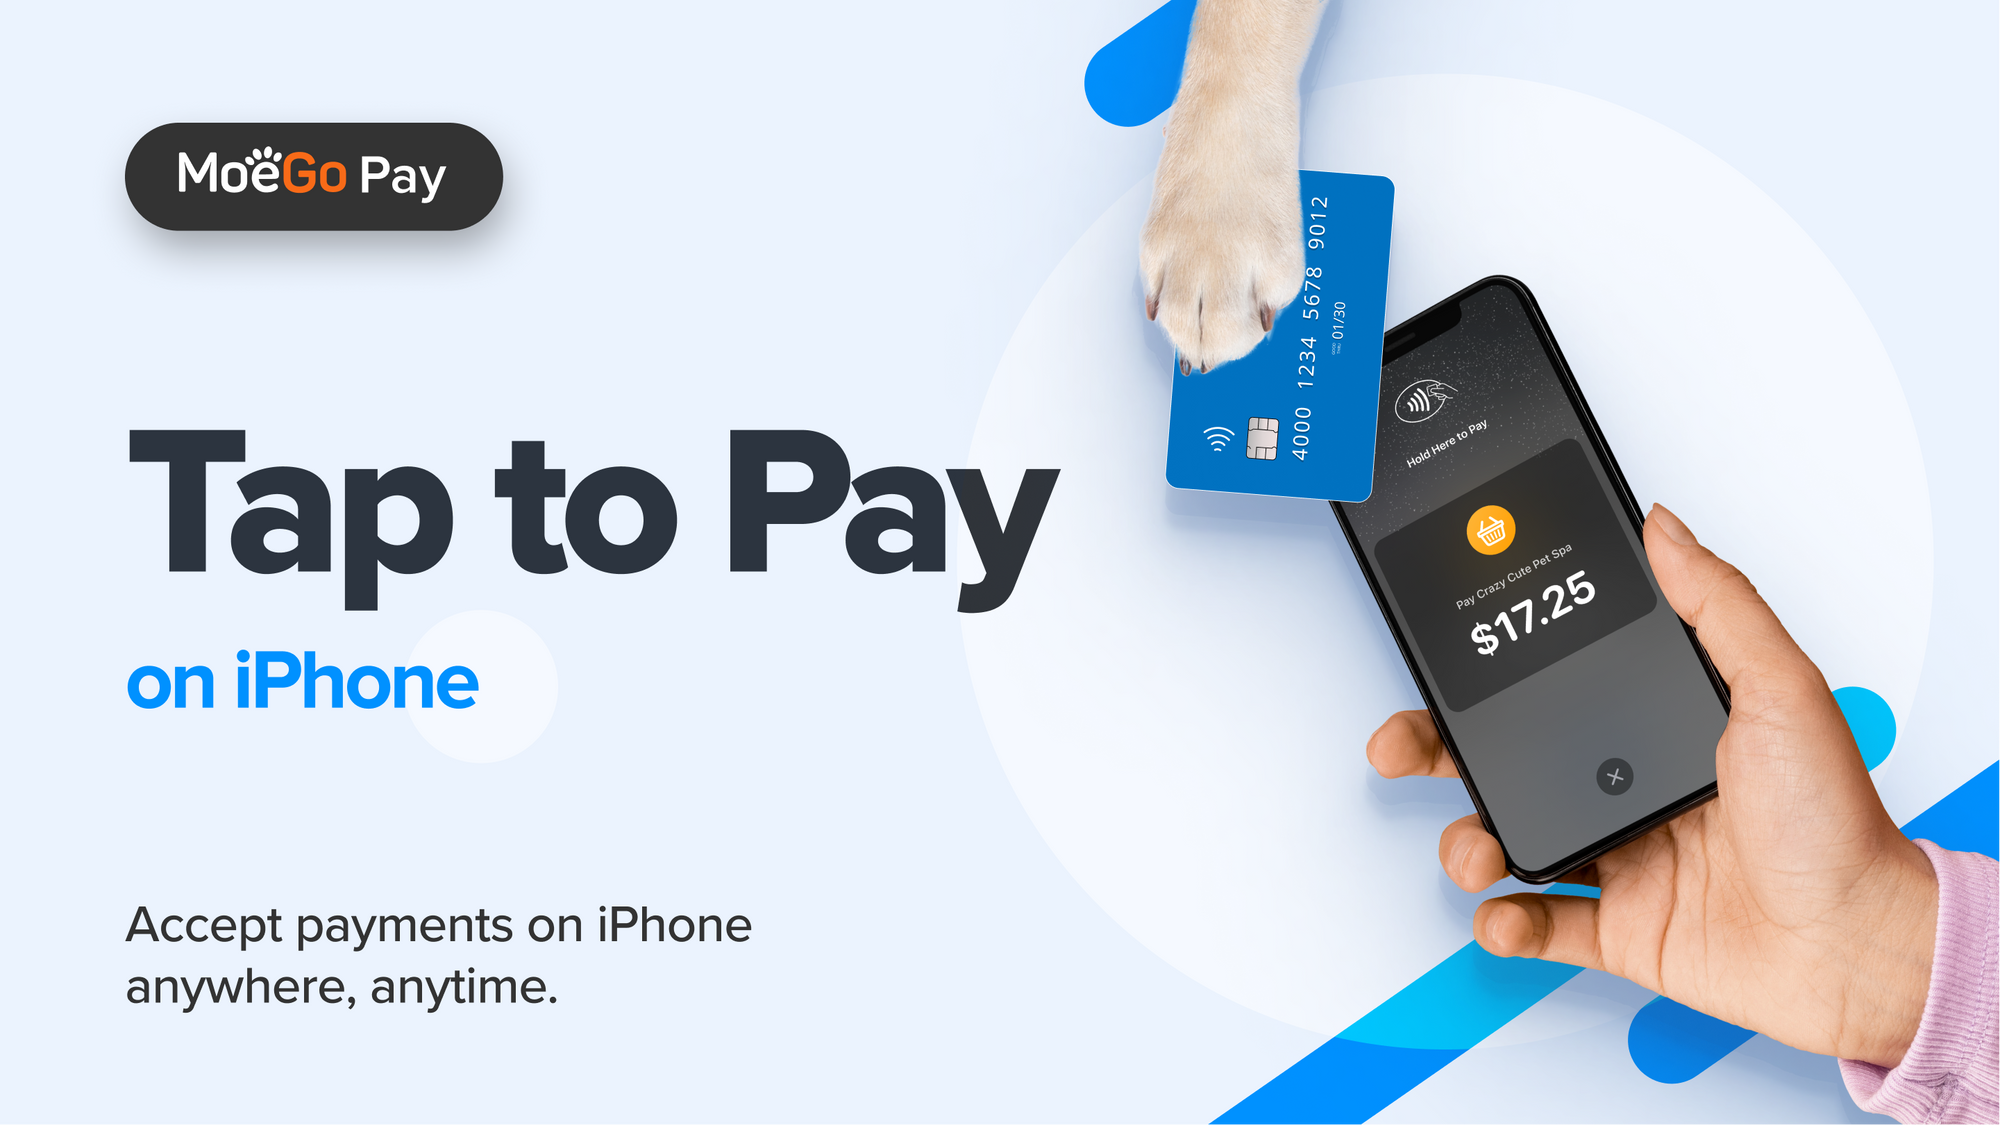 Get Started With Tap to Pay on iPhone